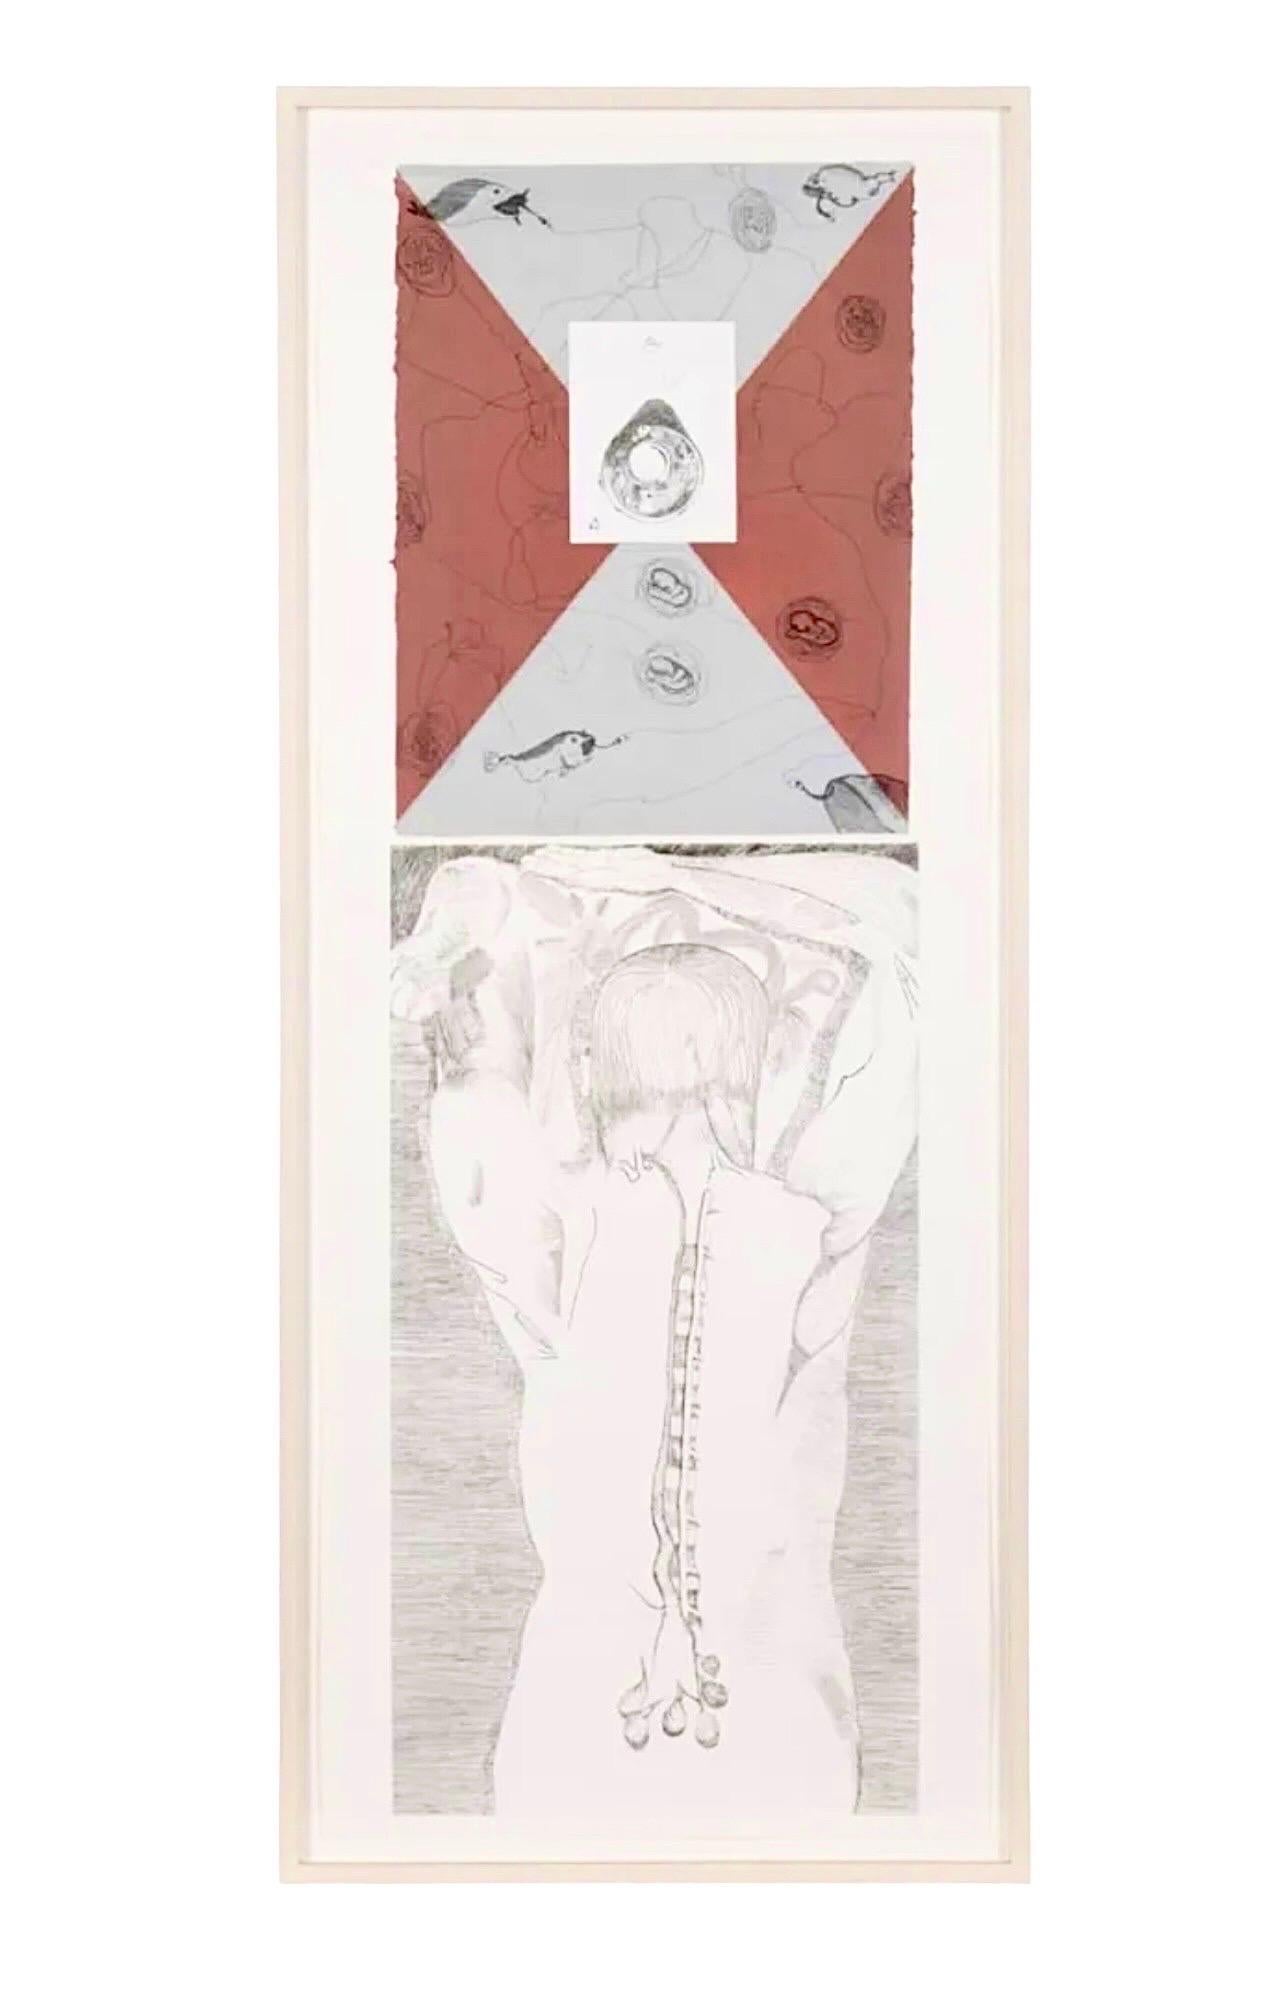 Francesco Clemente (Italian b. 1952), 
'This side up / Telemone #2, 
1981
Medium:	Intaglio hard ground etching, color aquatint, drypoint, and soft-ground etching with chine collé (handmade paper) mounted on Arches 88 paper.
Hand signed in pencil and